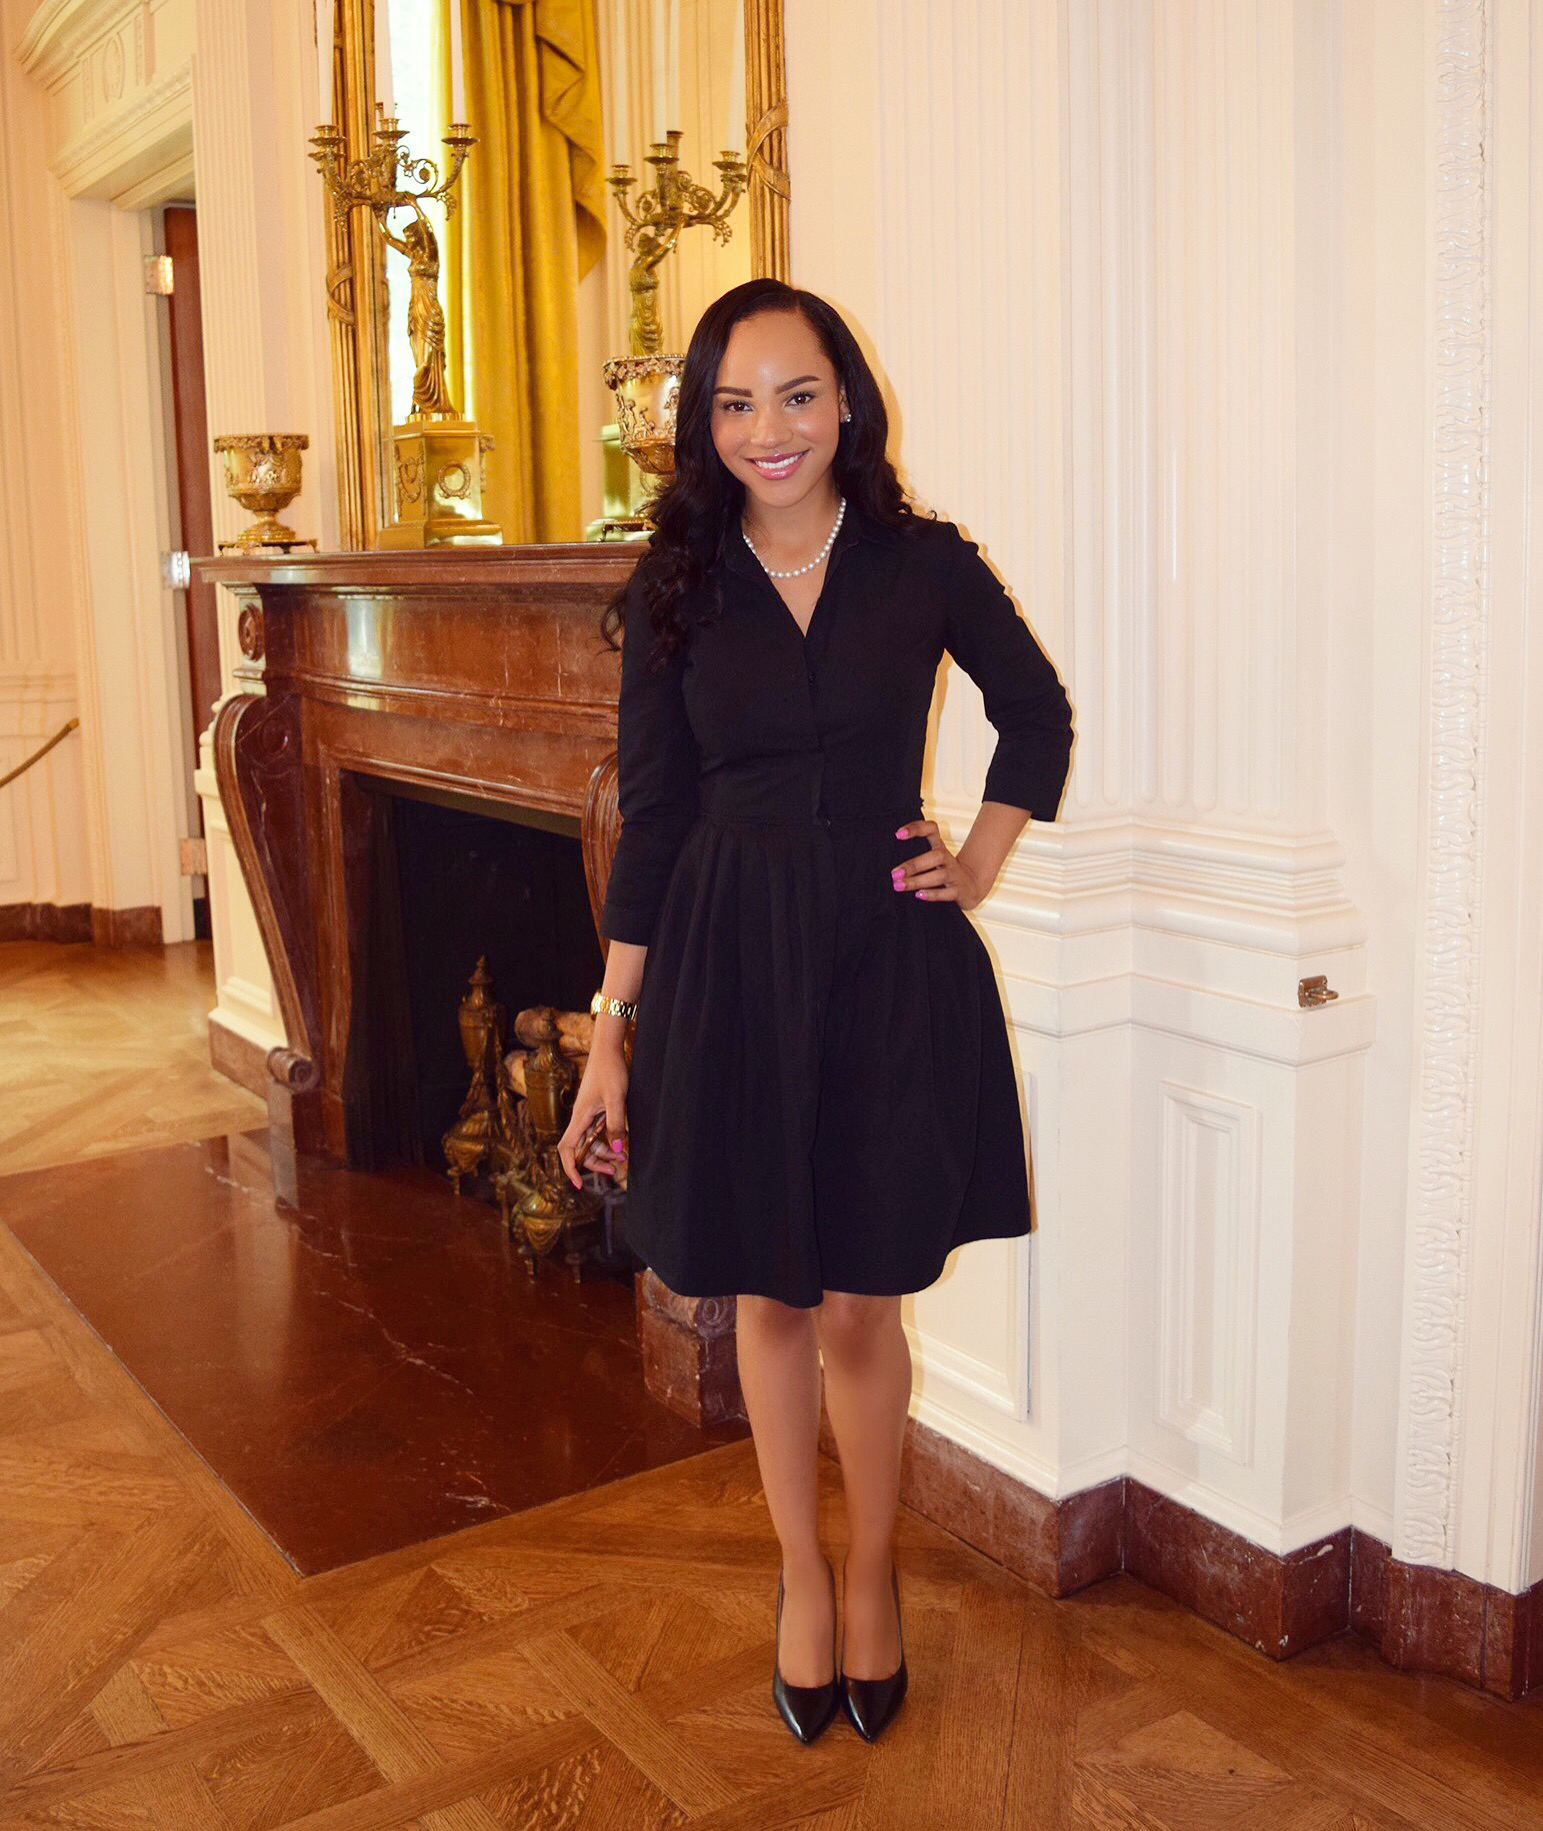 PHOTO: Former White House intern Sequoia Baker poses in The White House's East Room.